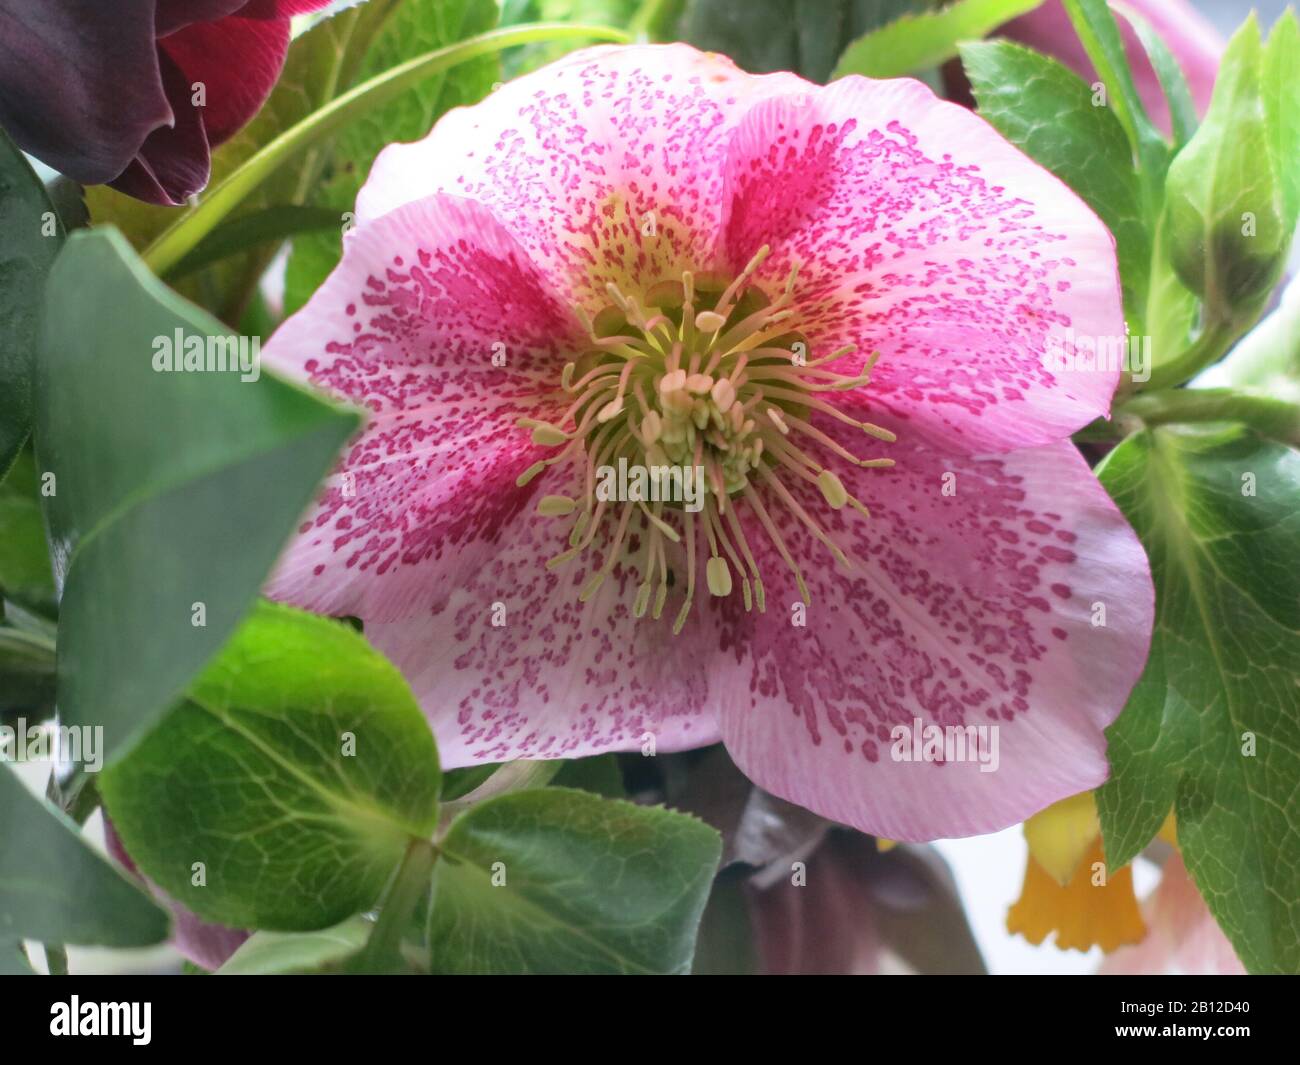 Close-up of a single flower-head of a pretty pink hellebore, or Lenten Rose, in delicate pink with flecks of purple. Stock Photo